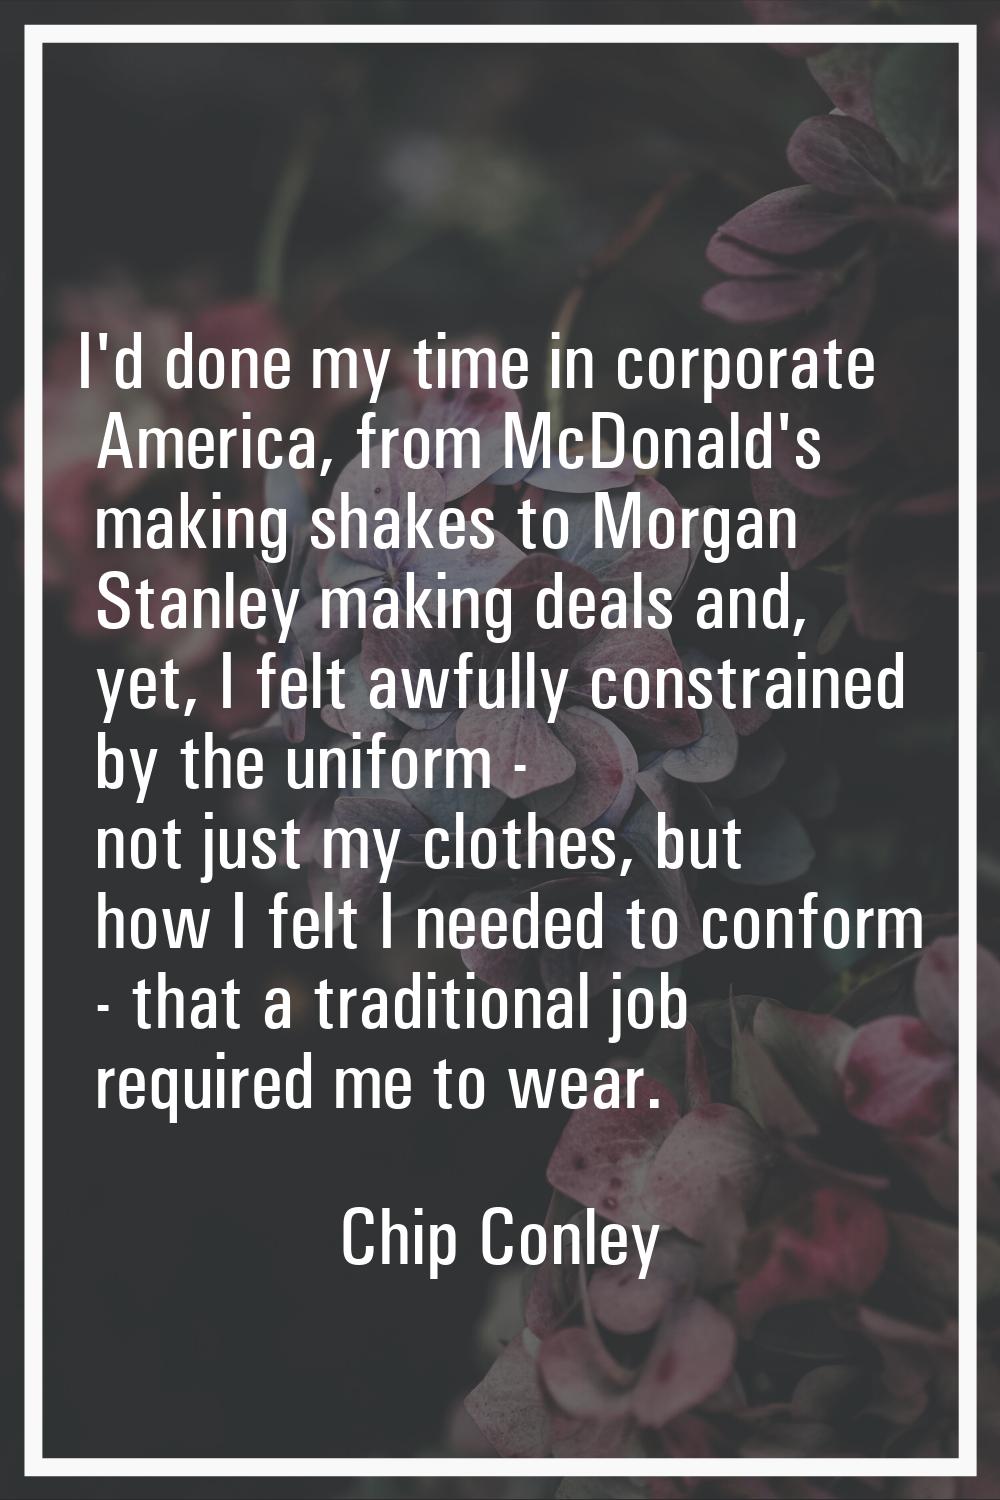 I'd done my time in corporate America, from McDonald's making shakes to Morgan Stanley making deals